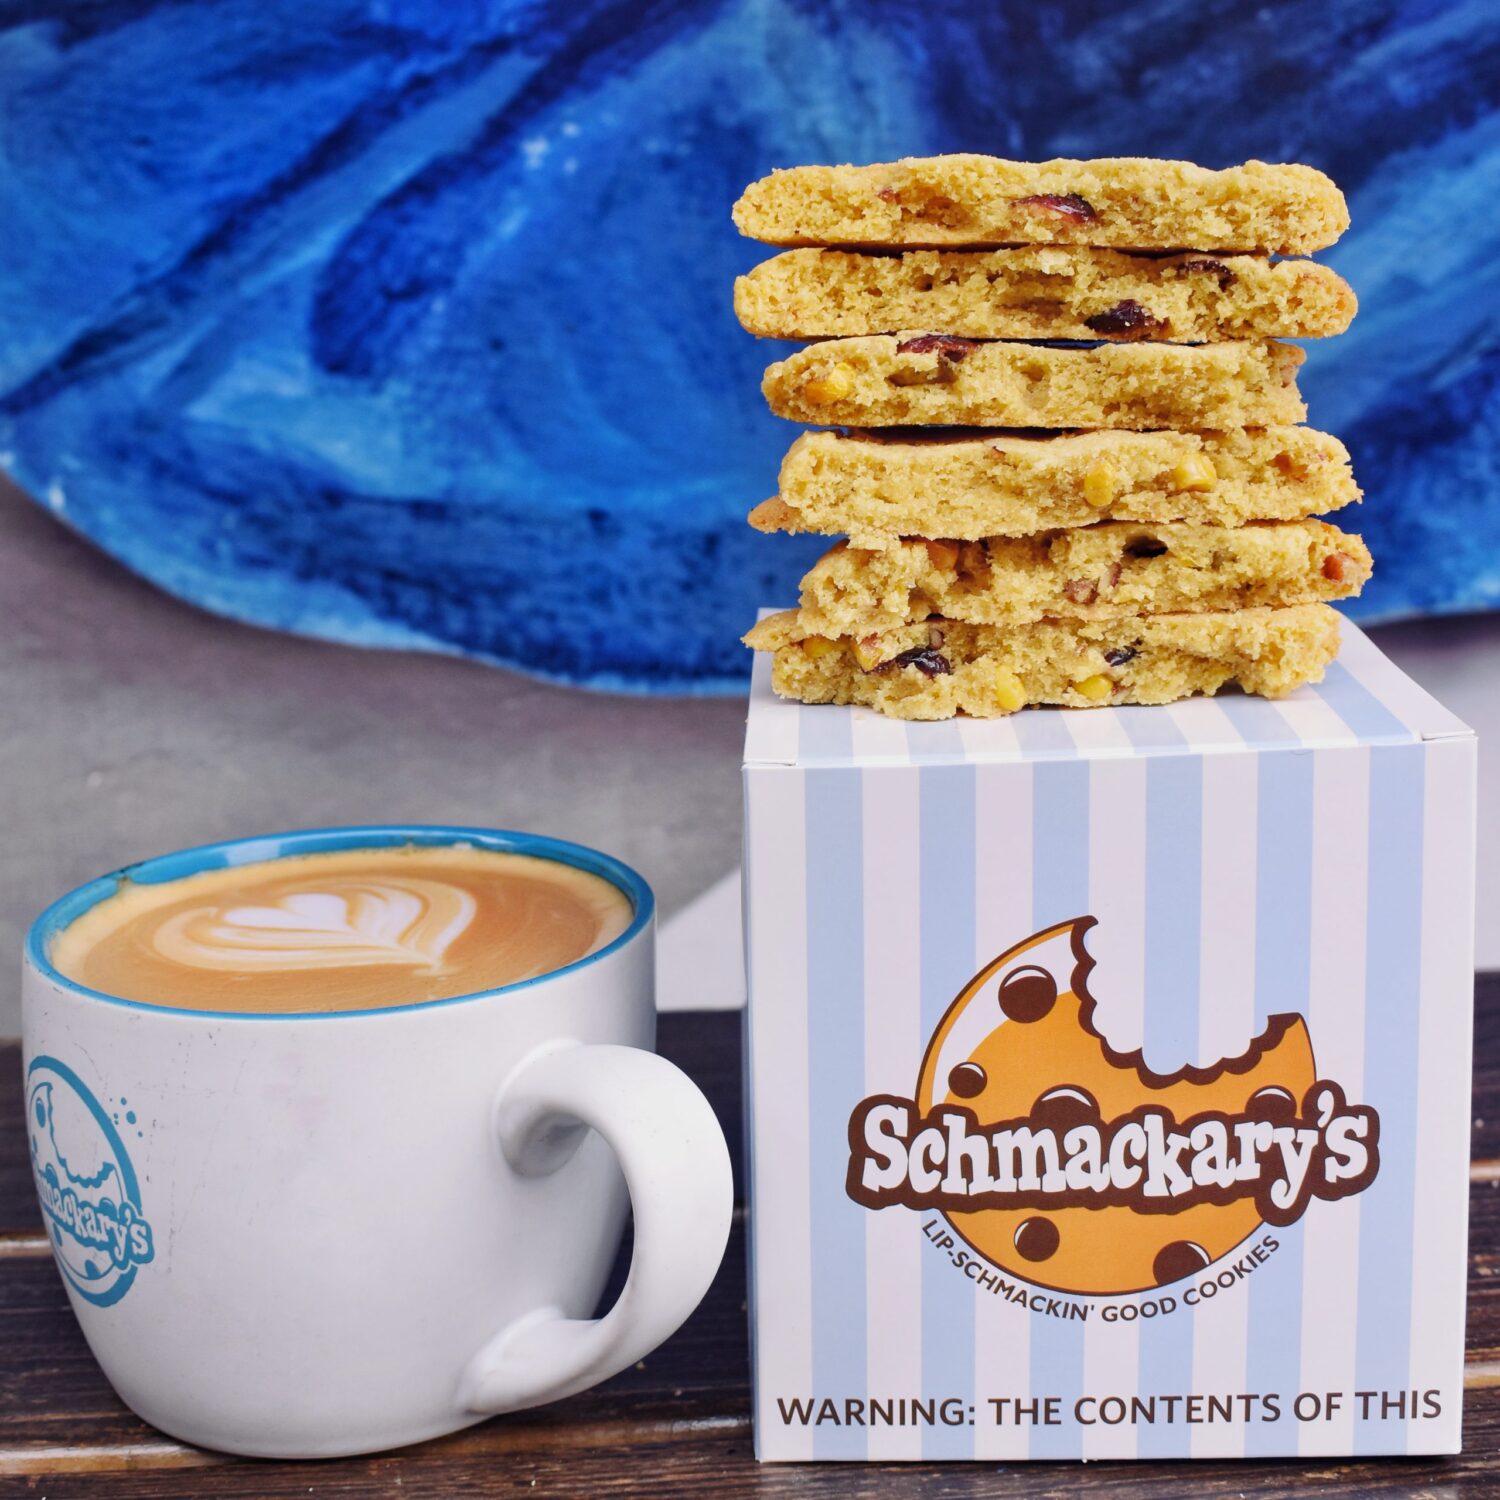 Schmackary's cookies franchise logo + picture of coffee cup next to box of cookies